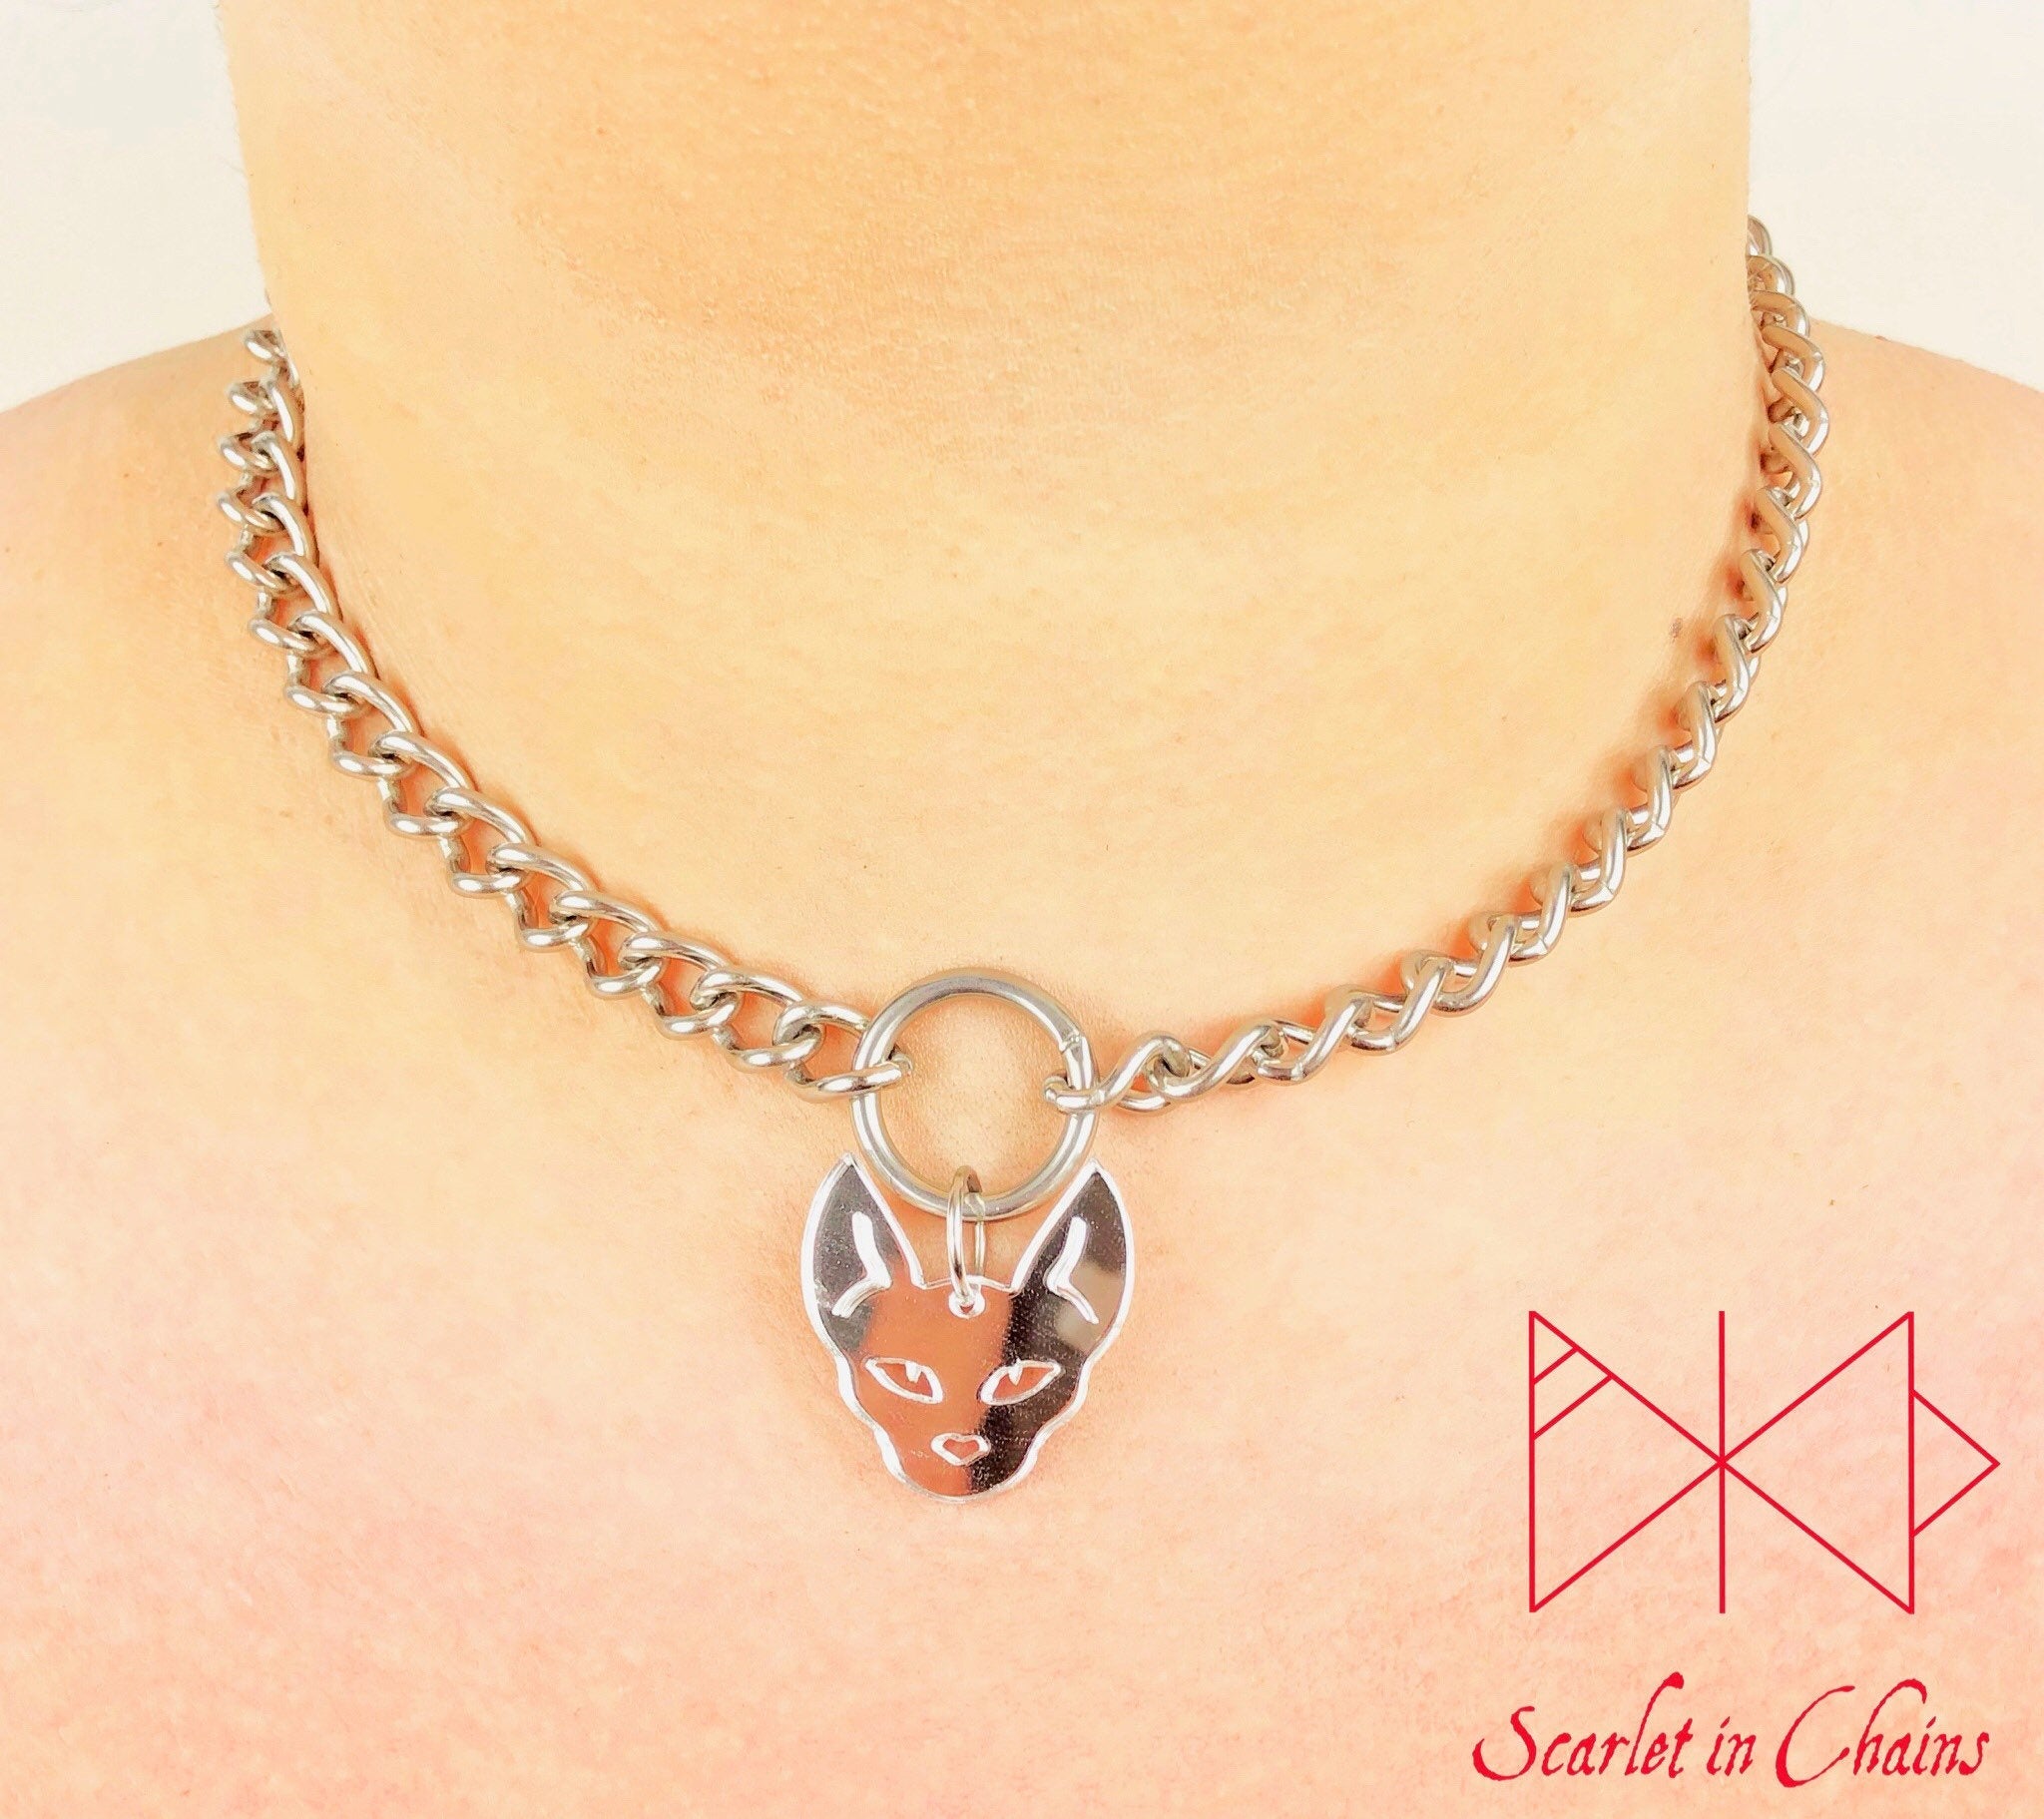 Stainless steel chain o ring choker with mirrored perspex sphynx charm